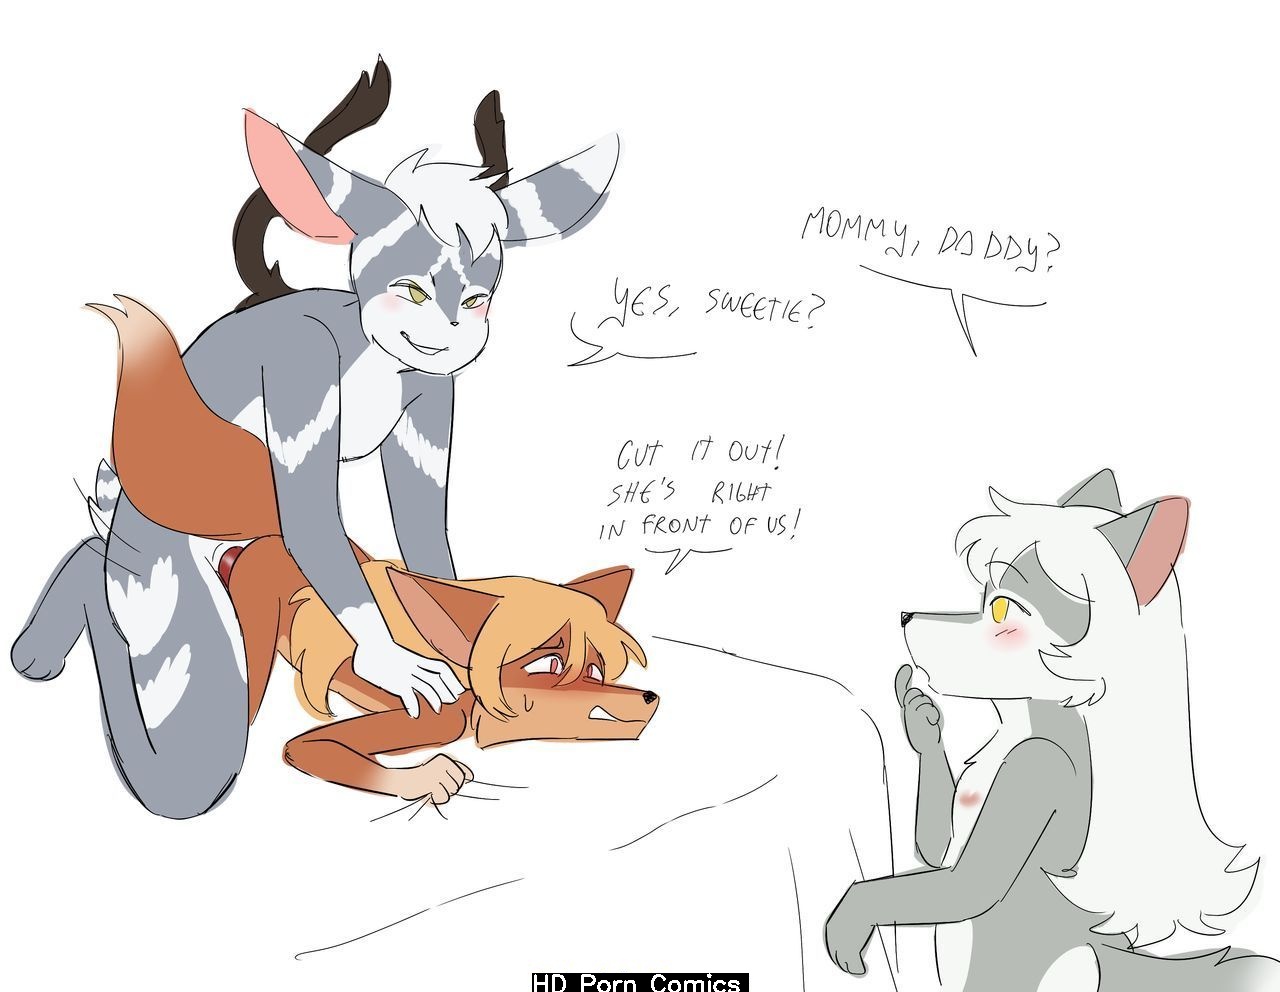 Furry Daughter Porn - Not In Front Of Her! comic porn - HD Porn Comics